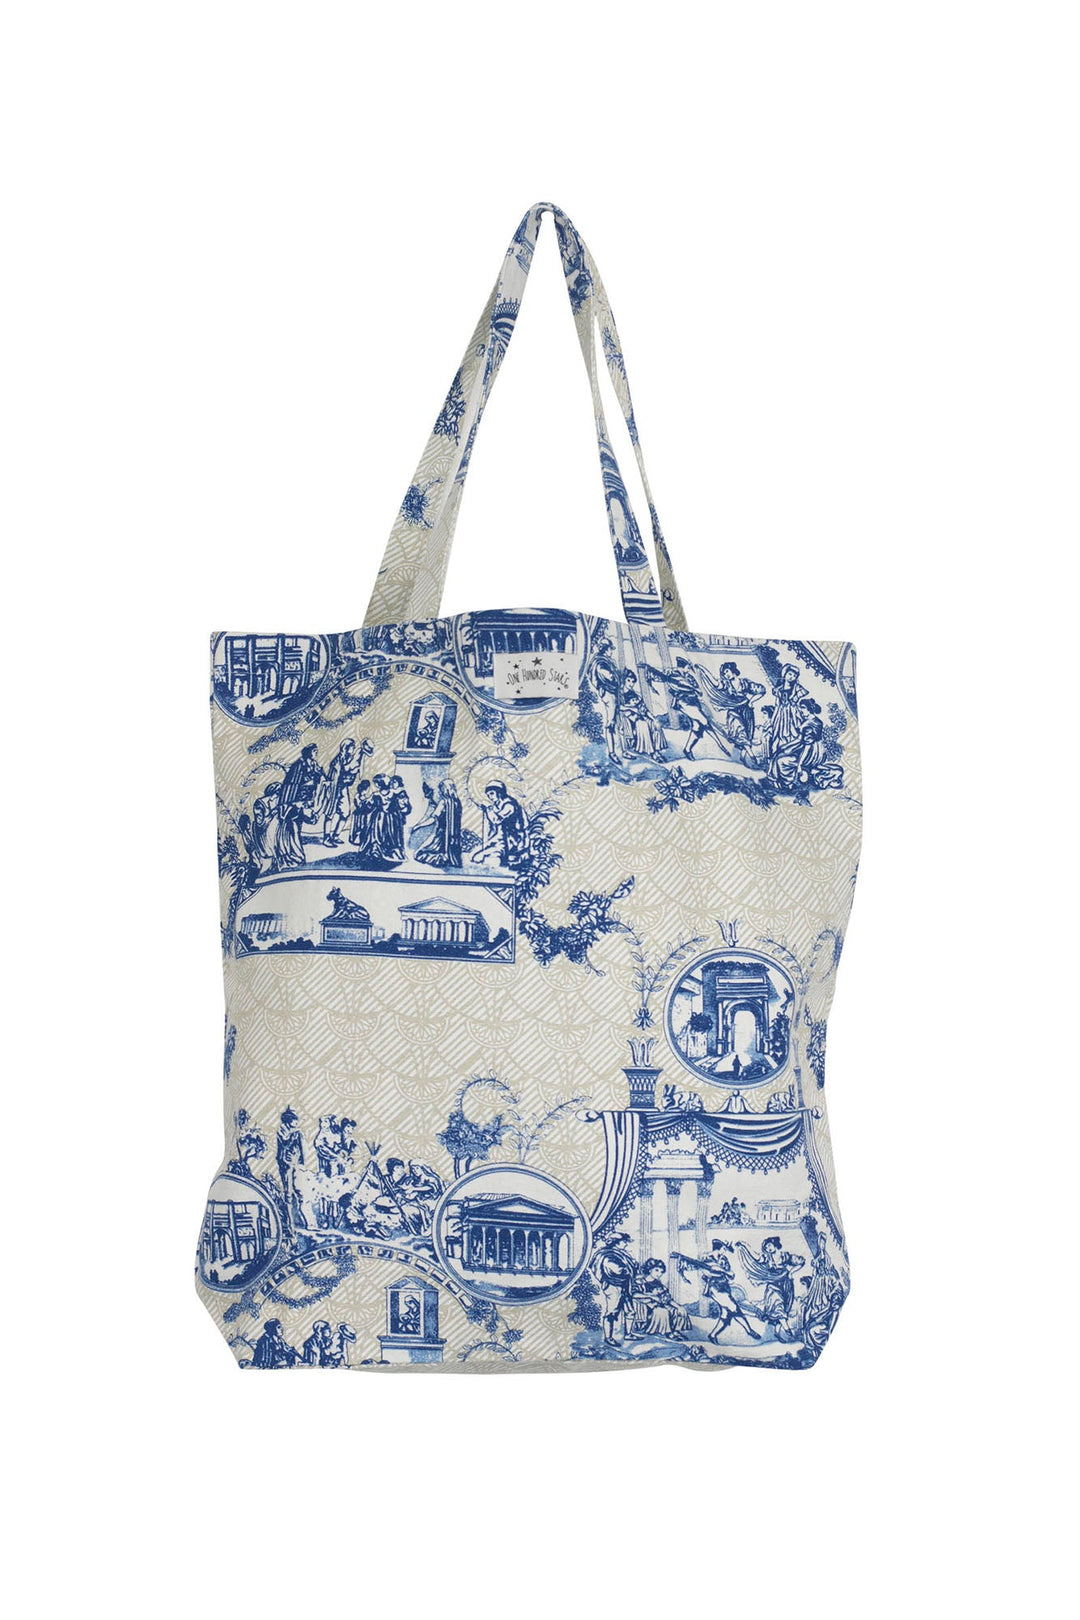 This blue and white print is inspired by classic French Toile De Jouy fabrics. This 100% sustainable cotton bag, reusable shopping bag, a classic tote for keeping your books in or a chic beach bag